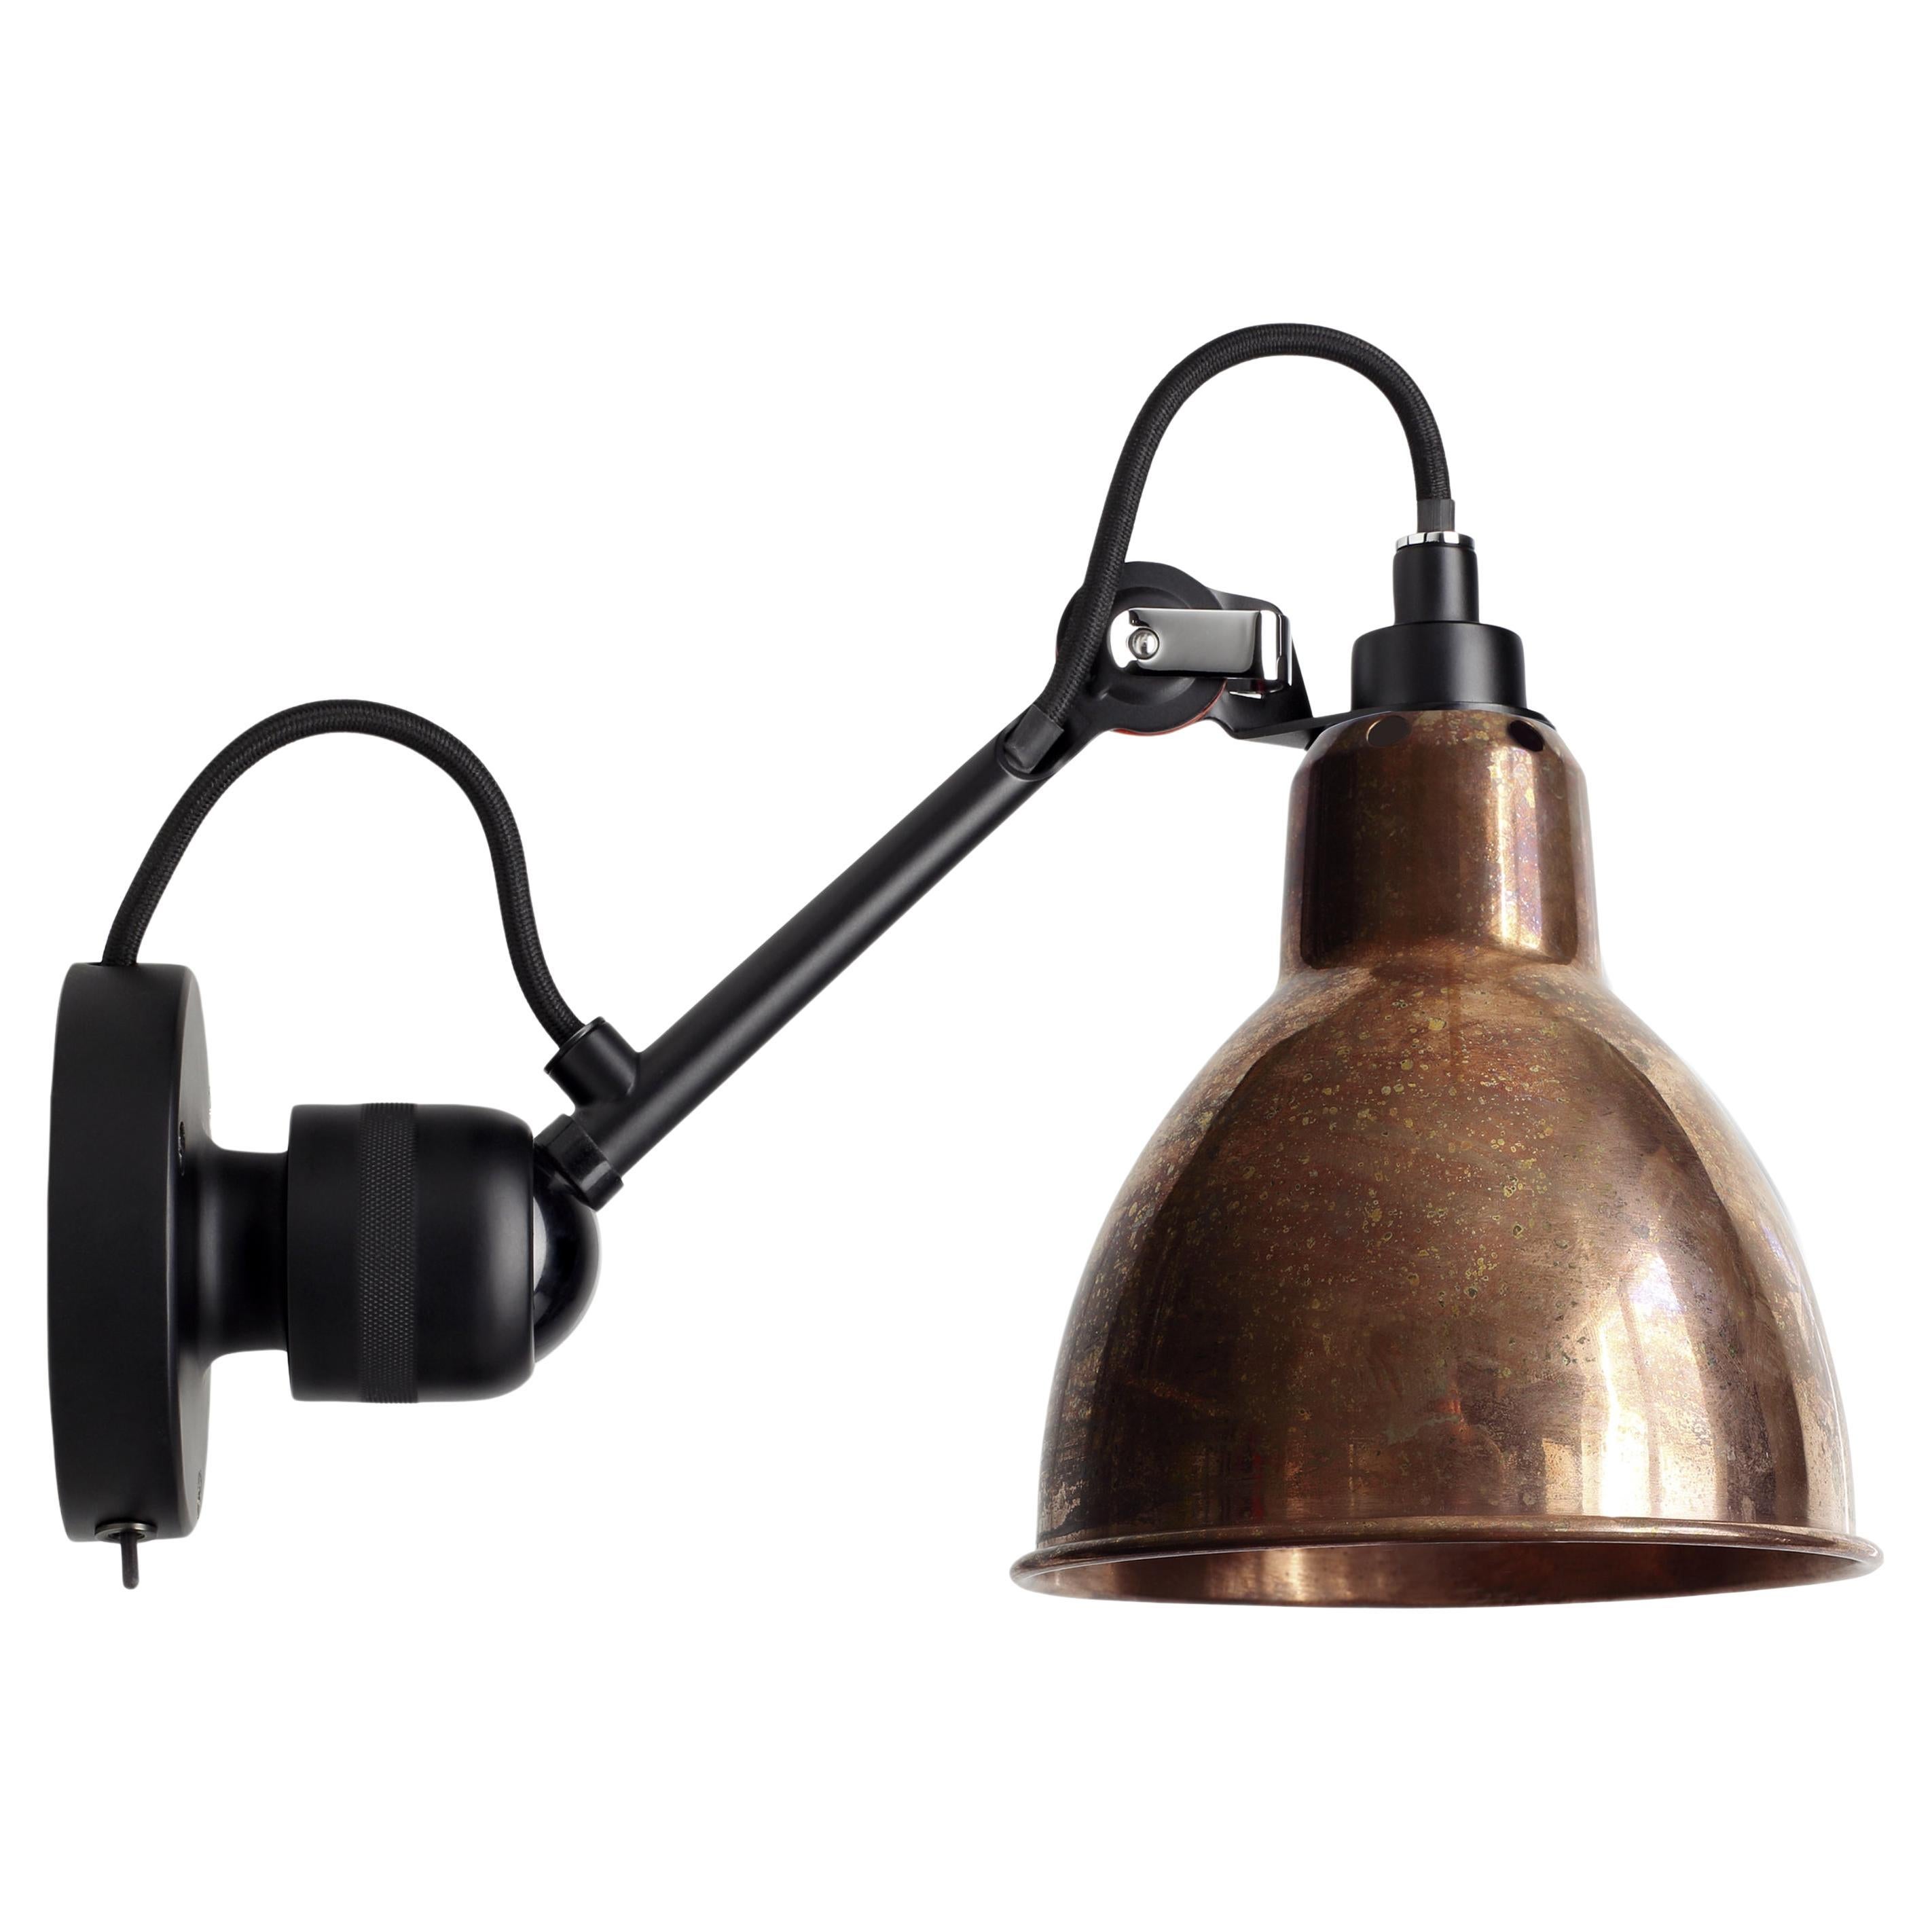 DCW Editions La Lampe Gras N°304 SW Wall Lamp in Black Arm and Raw Copper Shade For Sale